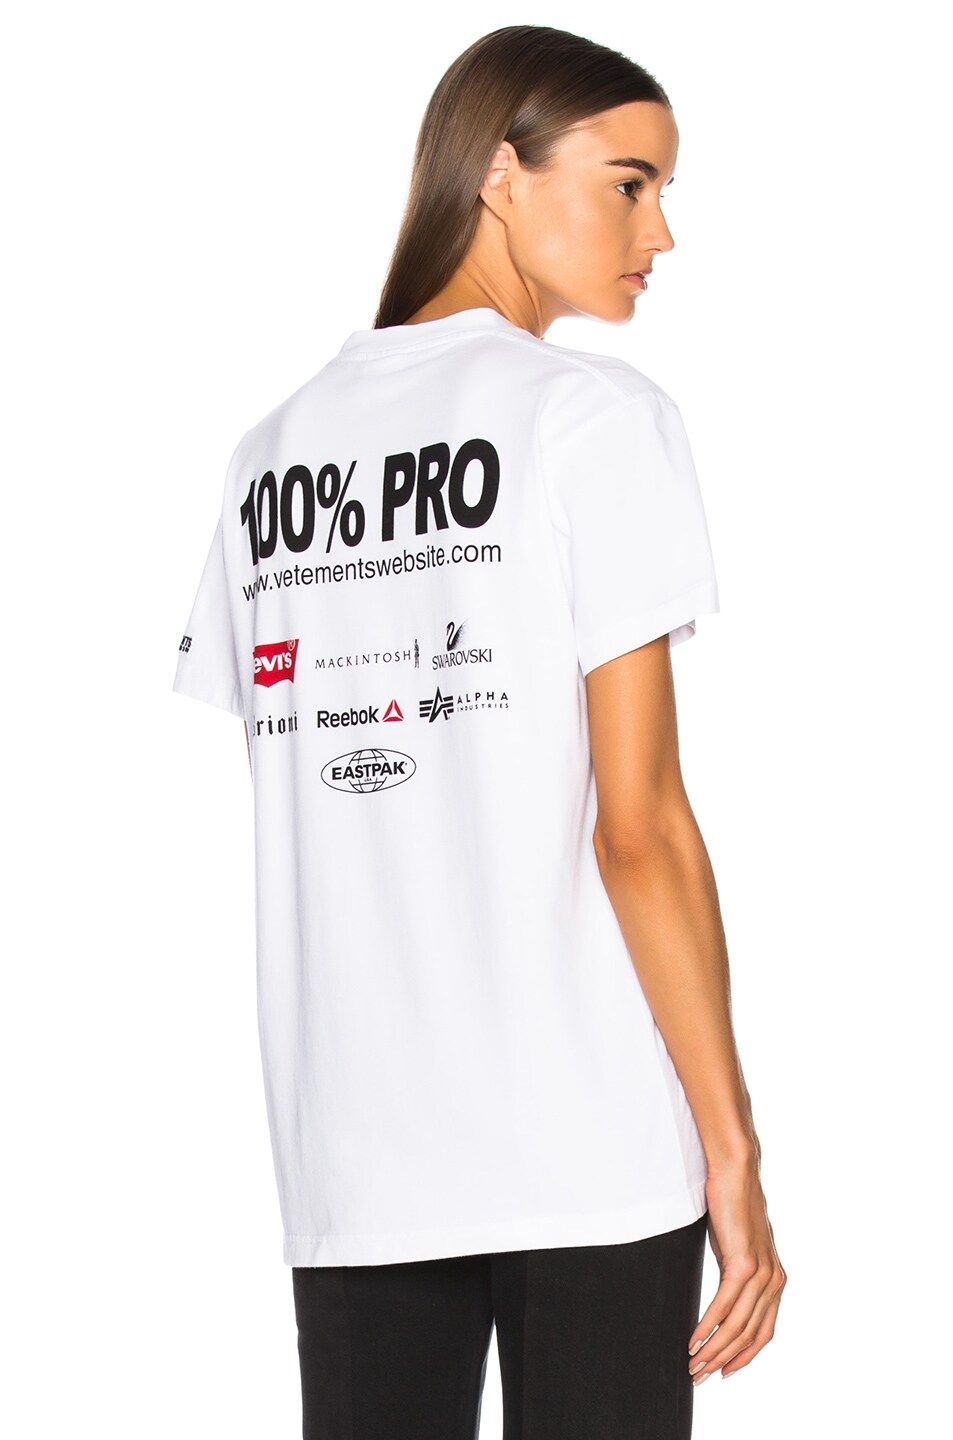 Image 1 of VETEMENTS 100% Pro Tee in White